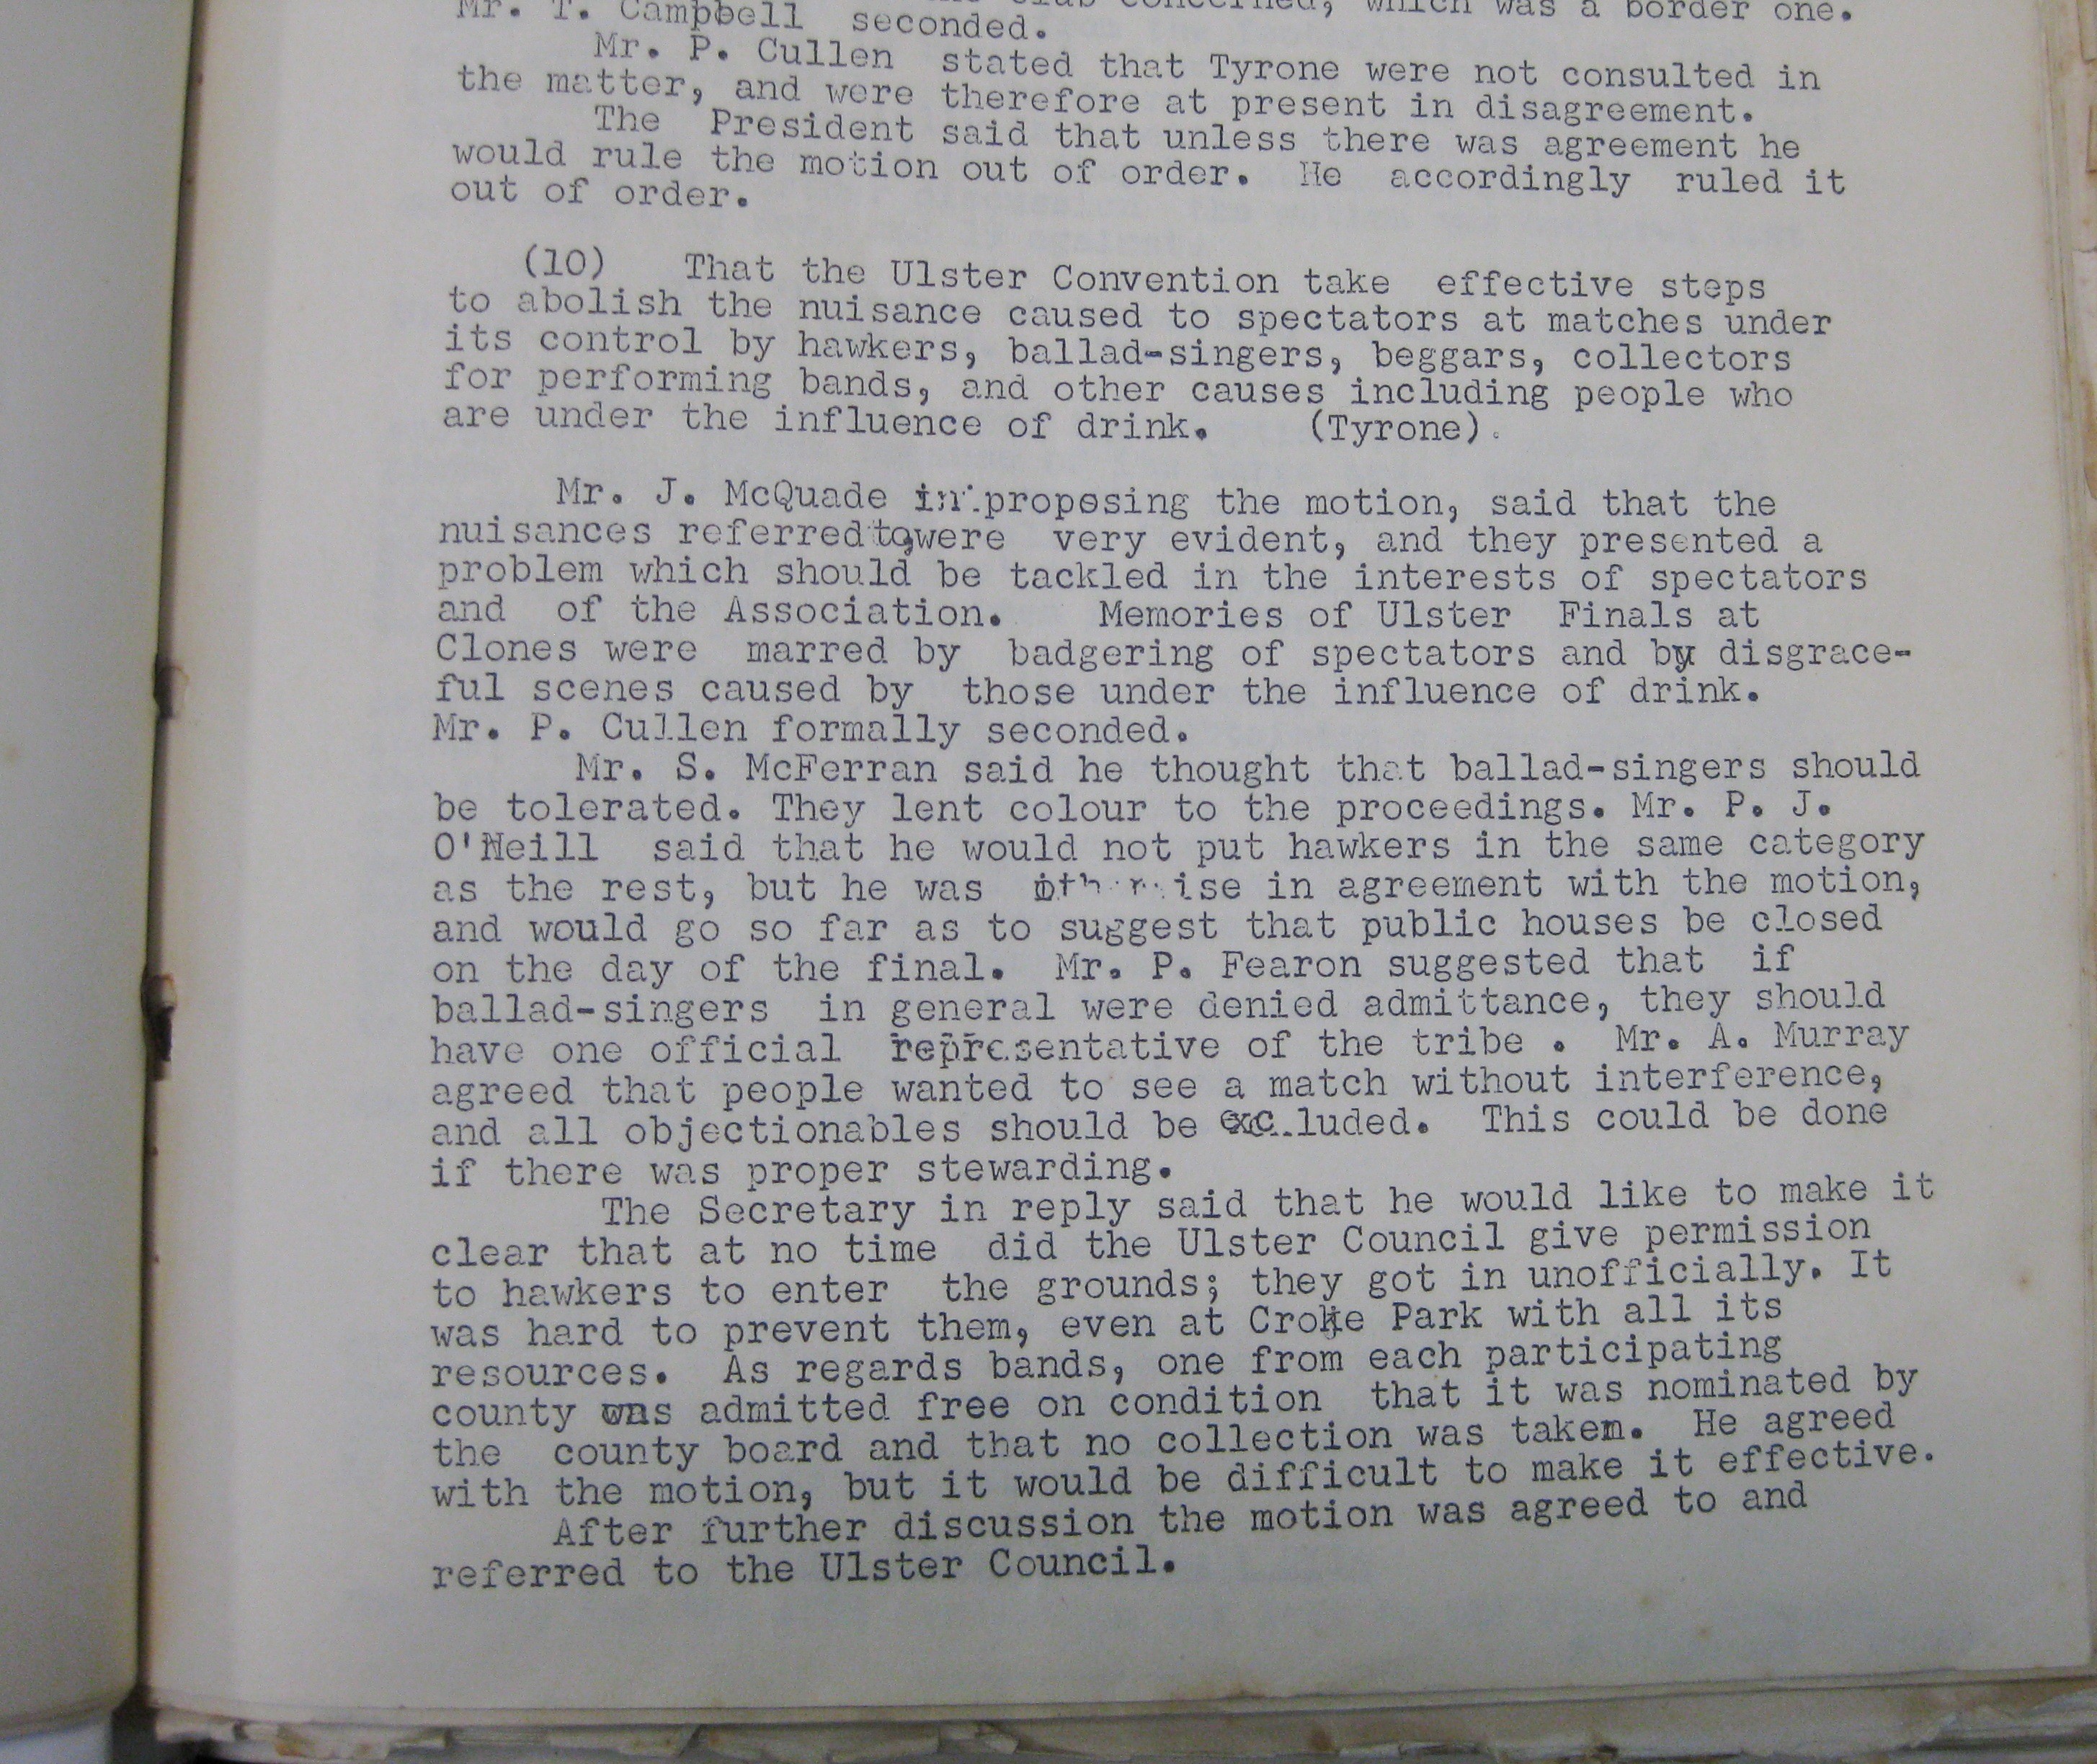 Ulster Convention proposal to ban hawkers, ballad-singers, beggars, and collectors from GAA matches as they were causing a nuisance to spectators, 1952.